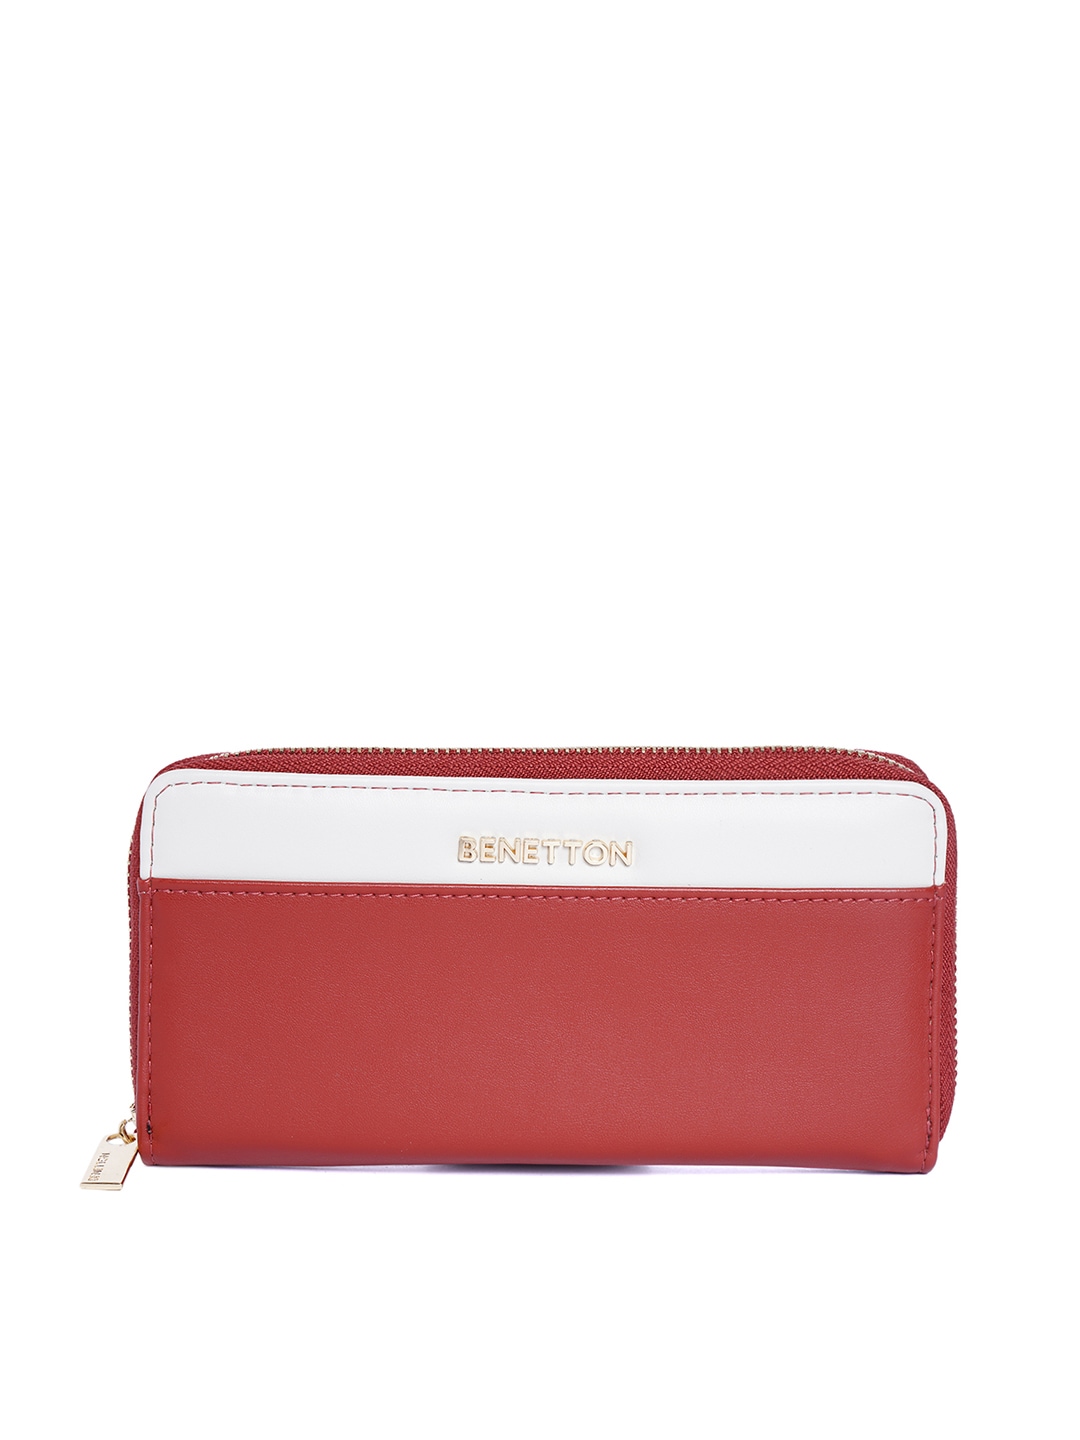 United Colors of Benetton Women Red & White Colourblocked Zip Around Wallet Price in India